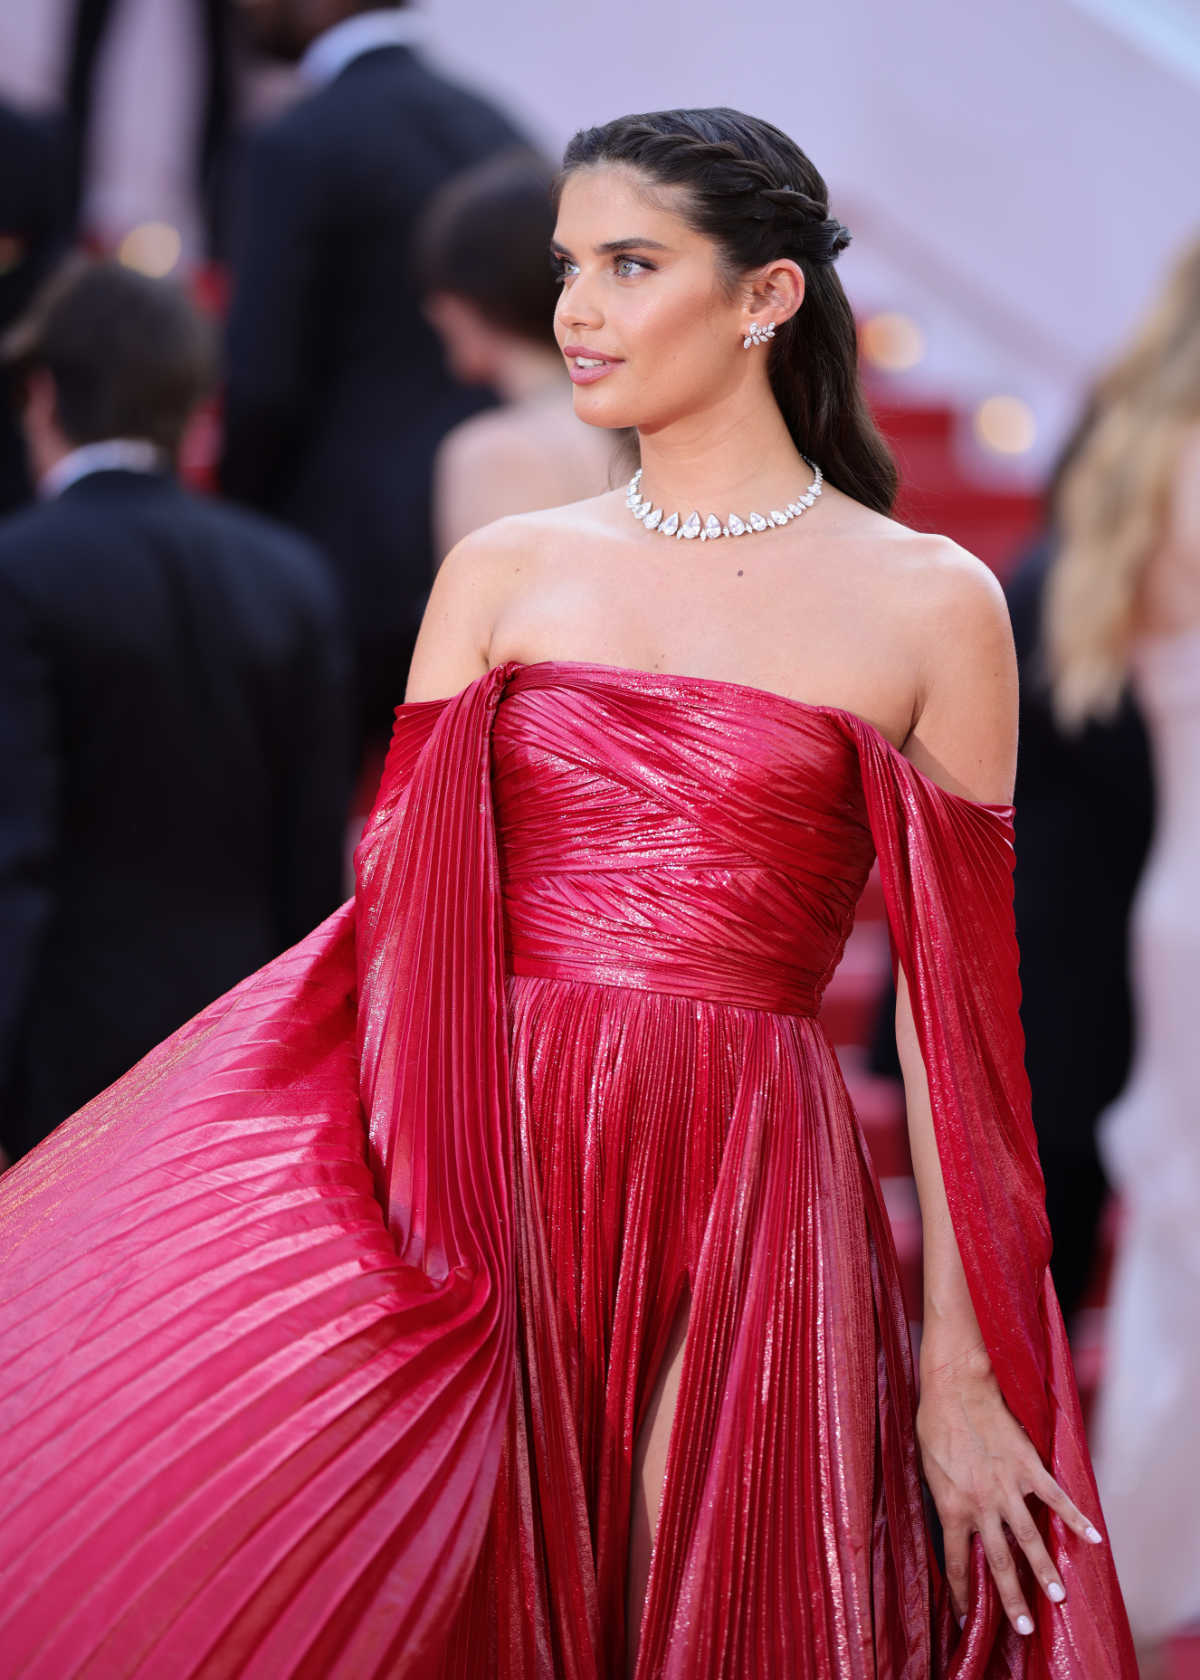 Messika Rocked The Red Carpet At Cannes Film Festival 2022